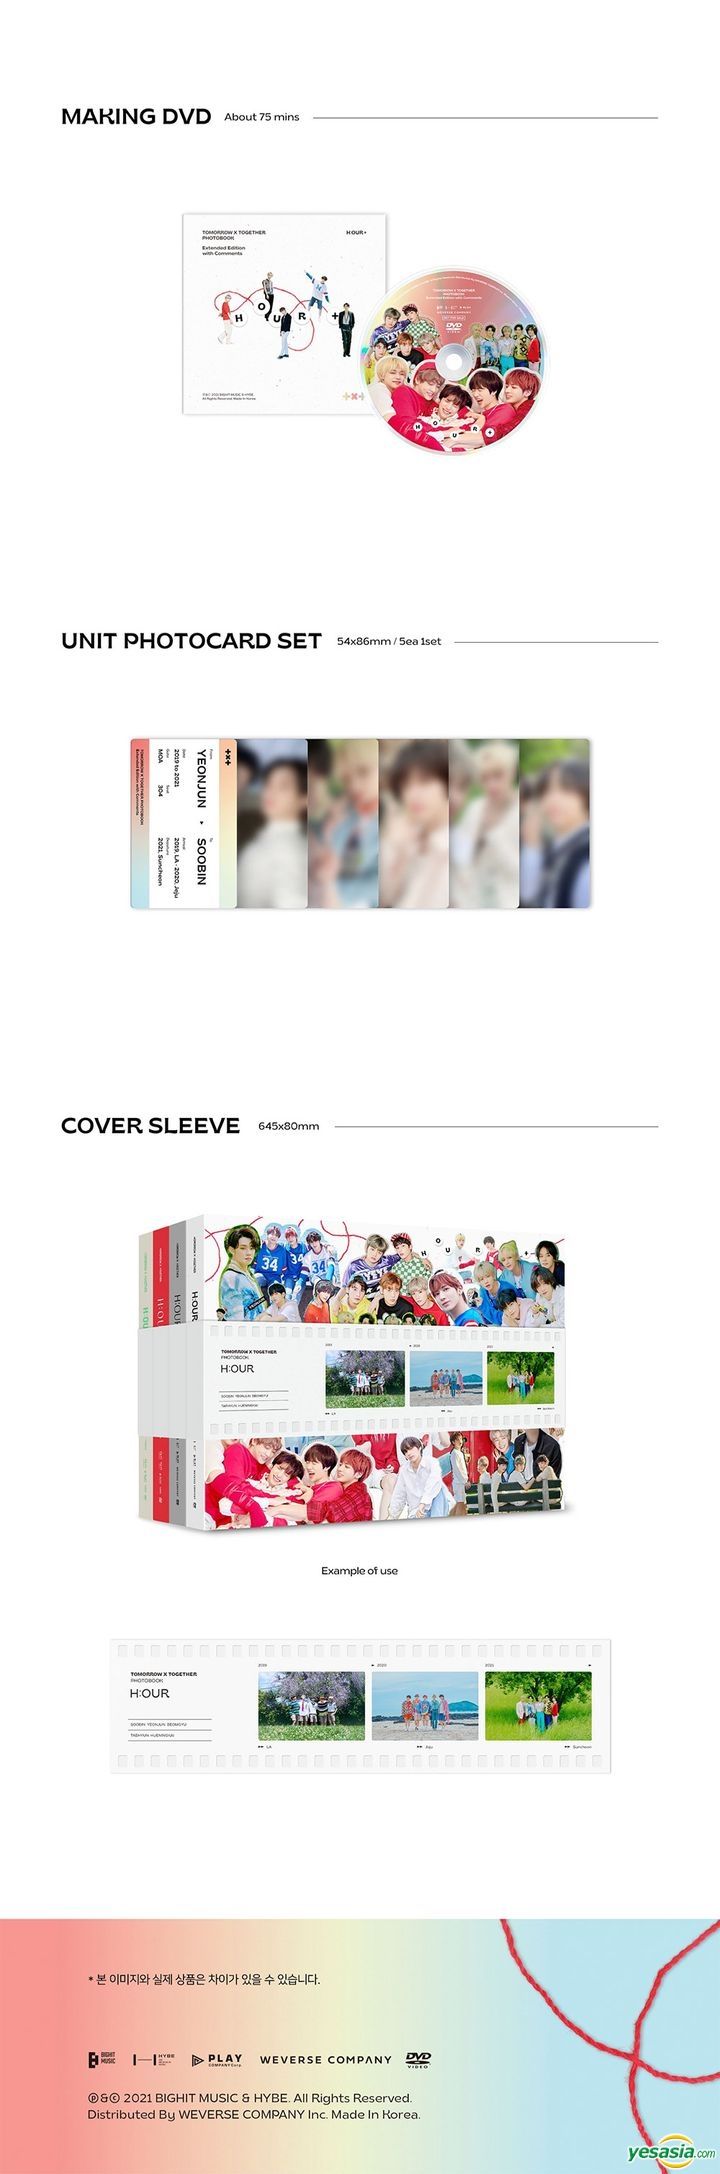 YESASIA: TXT Photobook - H:OUR+ Set (3rd Photobook + Extended 